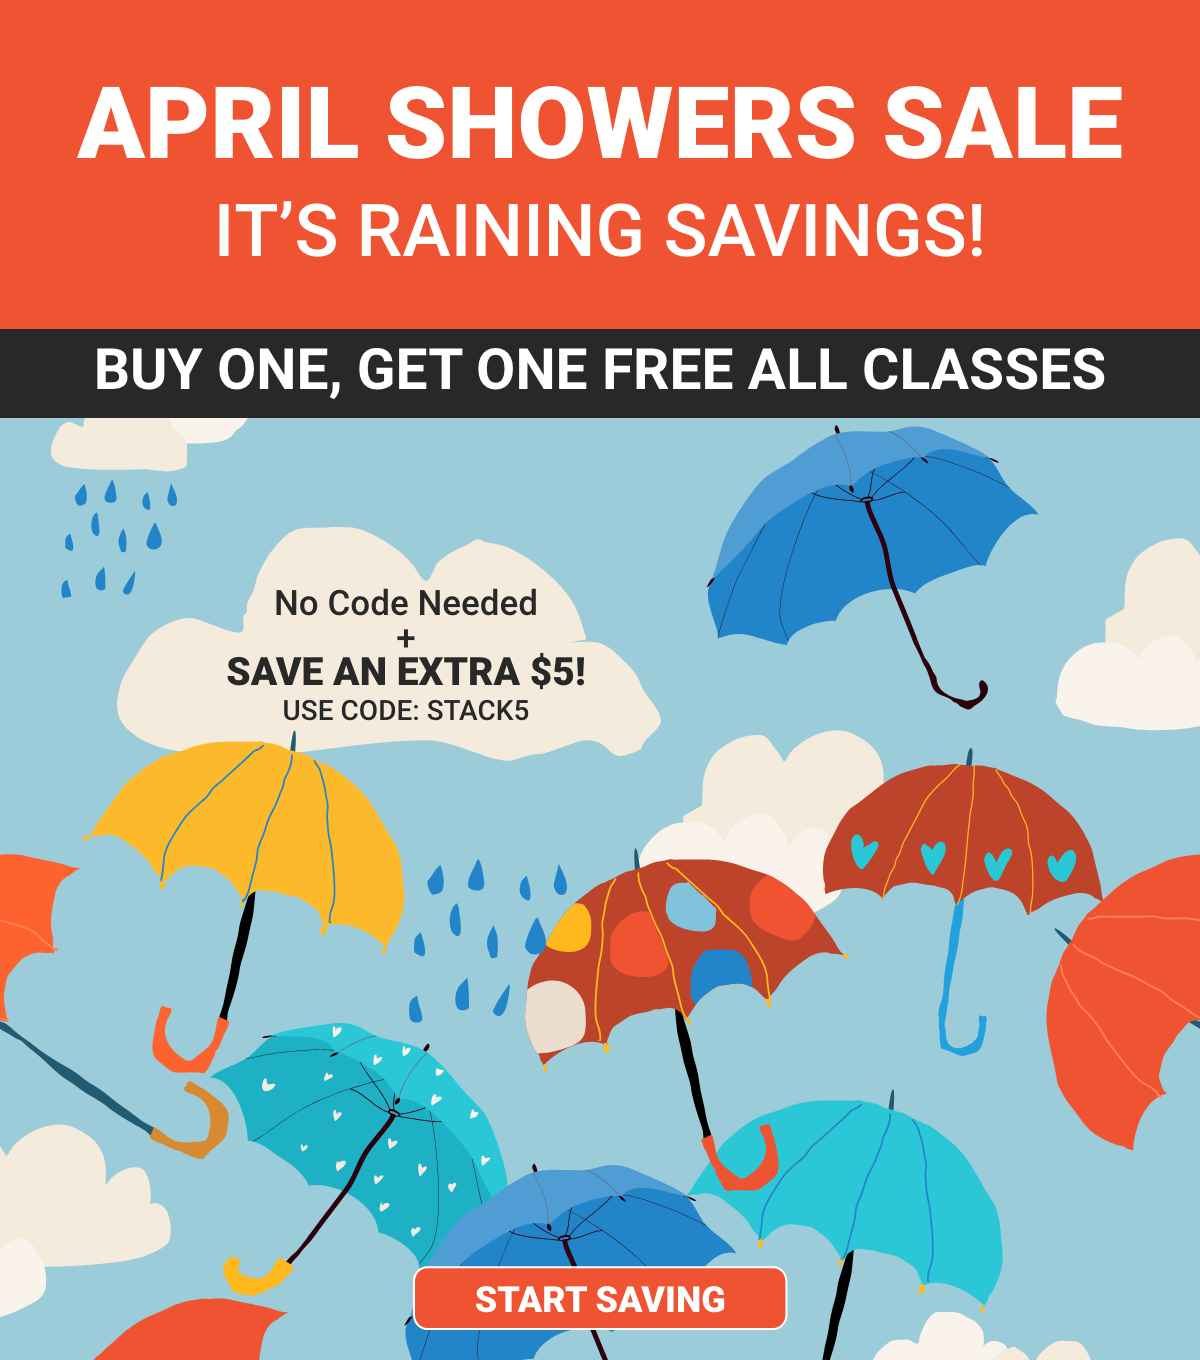 April Showers Sale Buy One Get One Free